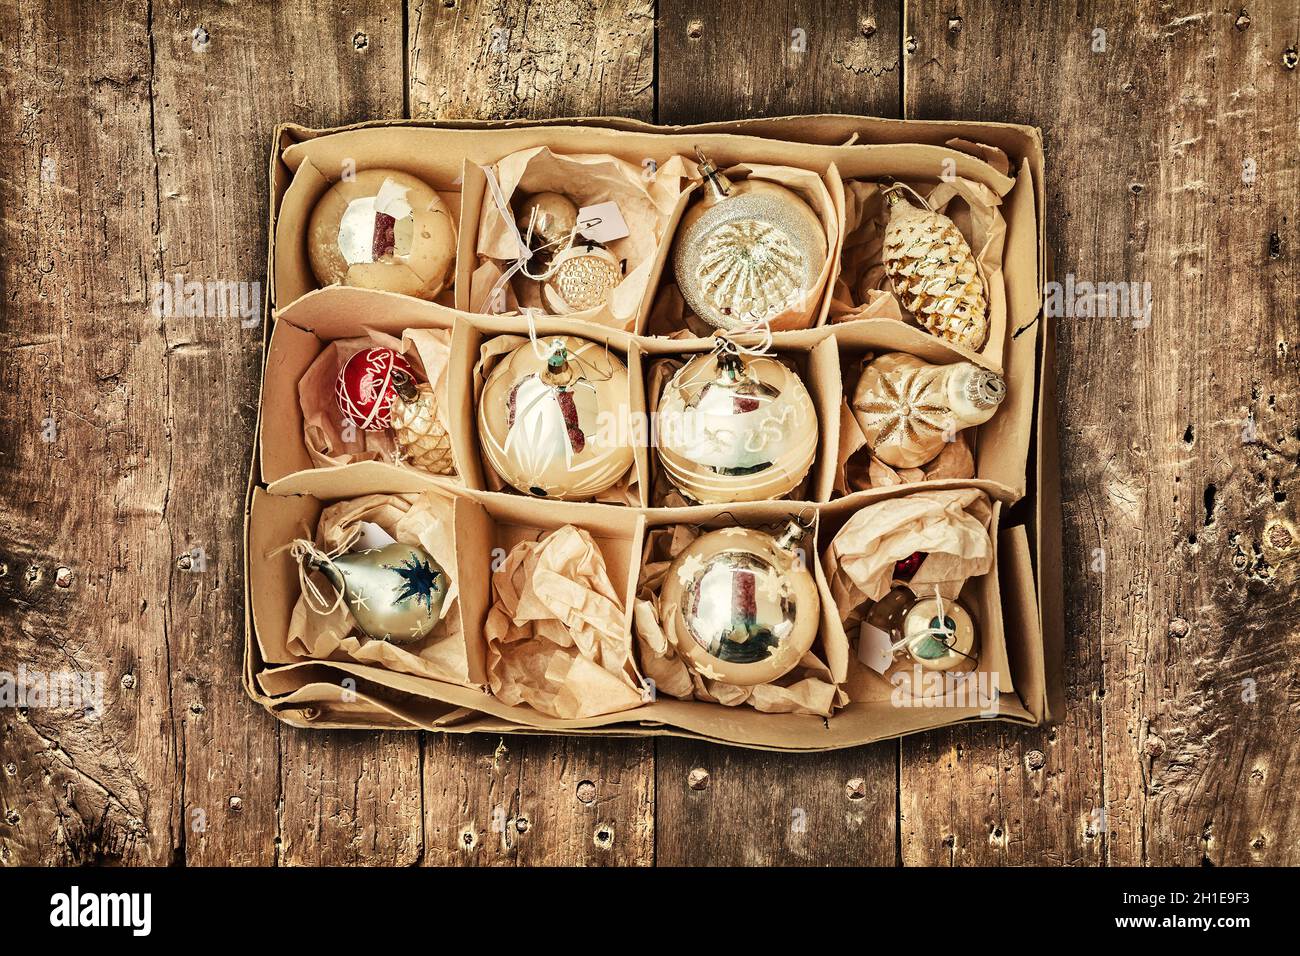 Retro styled image of vintage Christmas decoration in a box on a wooden floor Stock Photo